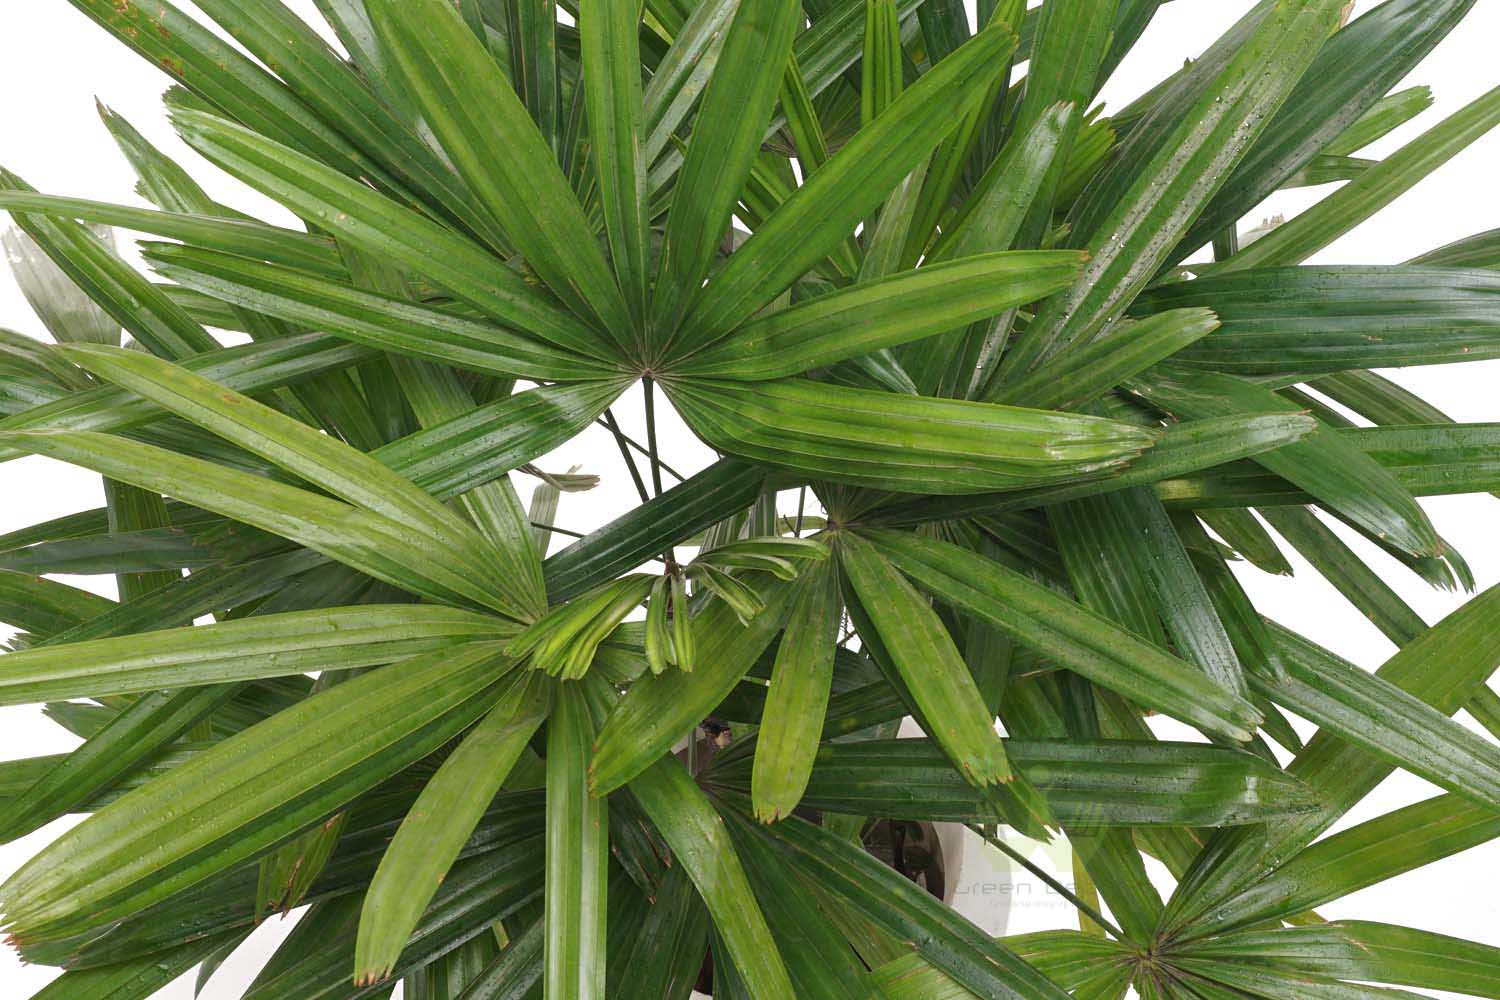 Buy Broadleaf Lady Palm Plants Top View , White Pots and seeds in Delhi NCR by the best online nursery shop Greendecor.